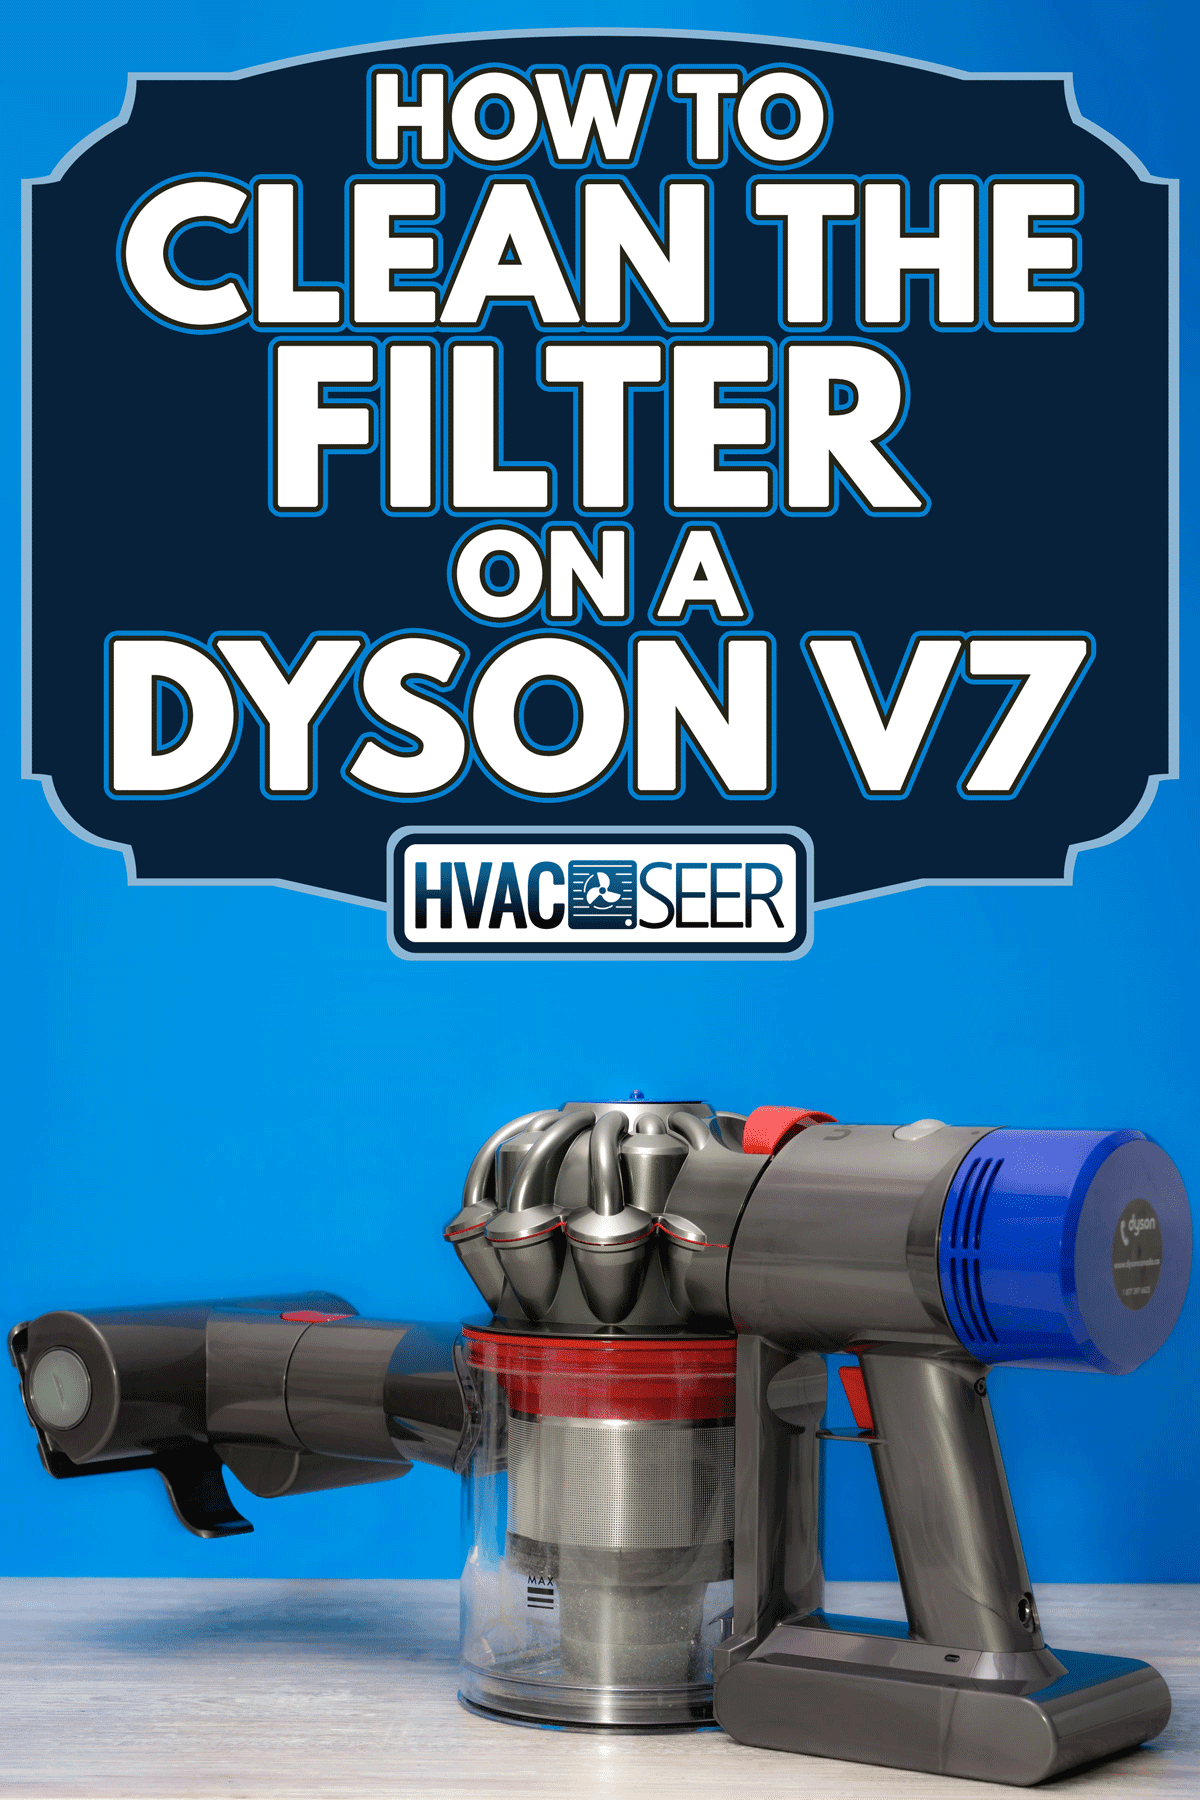 Dyson v7 vacuum cleaner, How To Clean The Filter On A Dyson V7